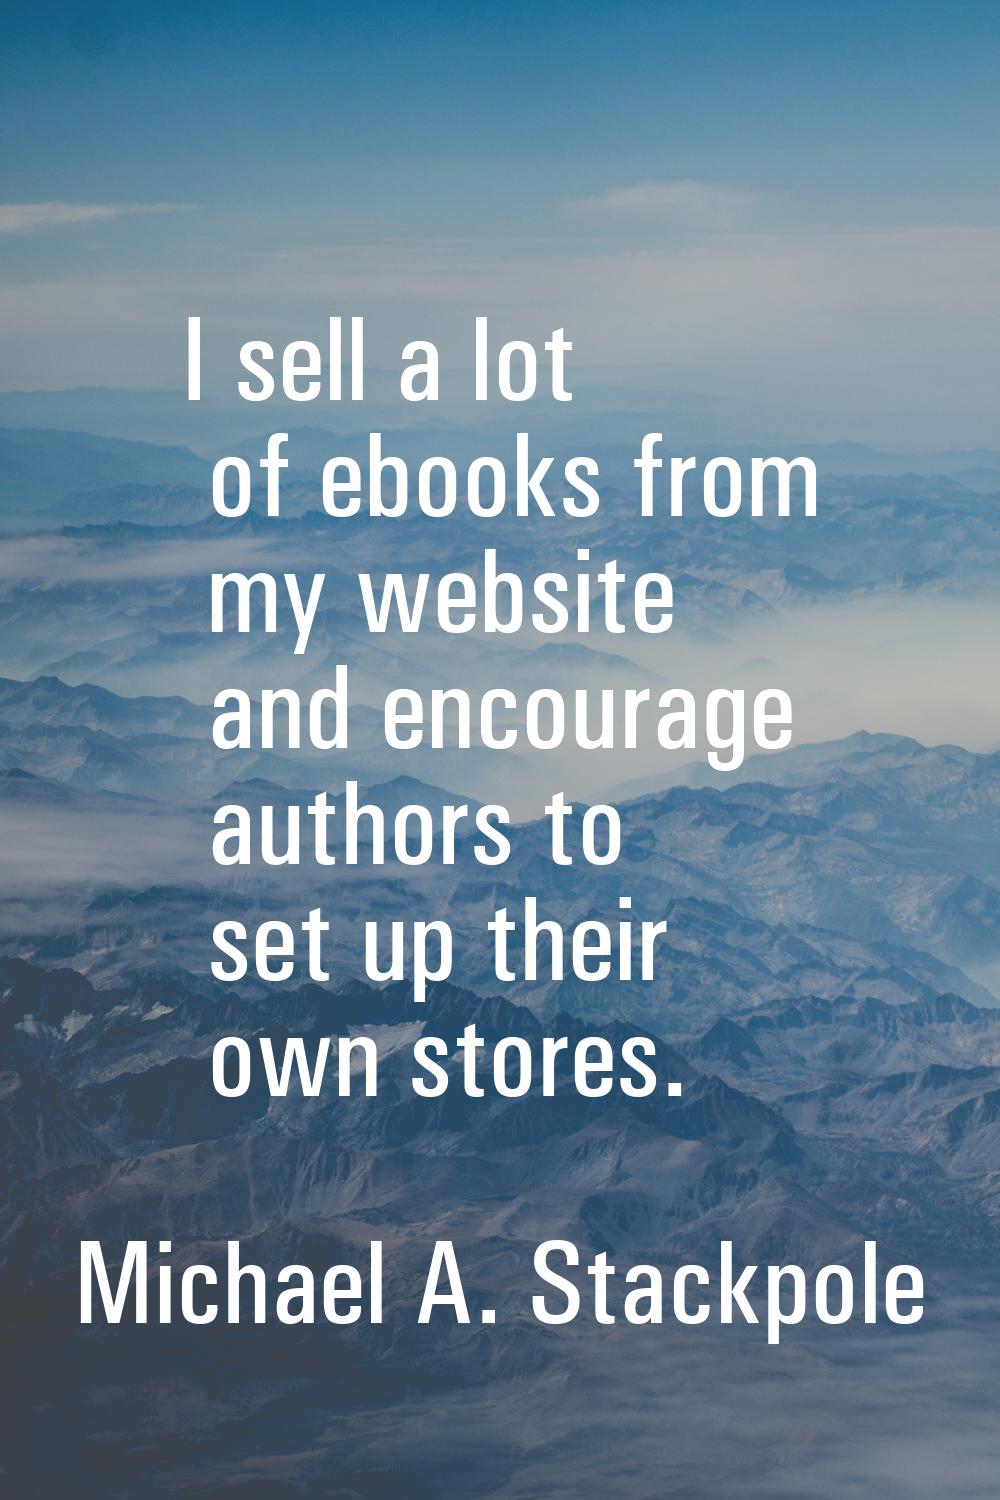 I sell a lot of ebooks from my website and encourage authors to set up their own stores.